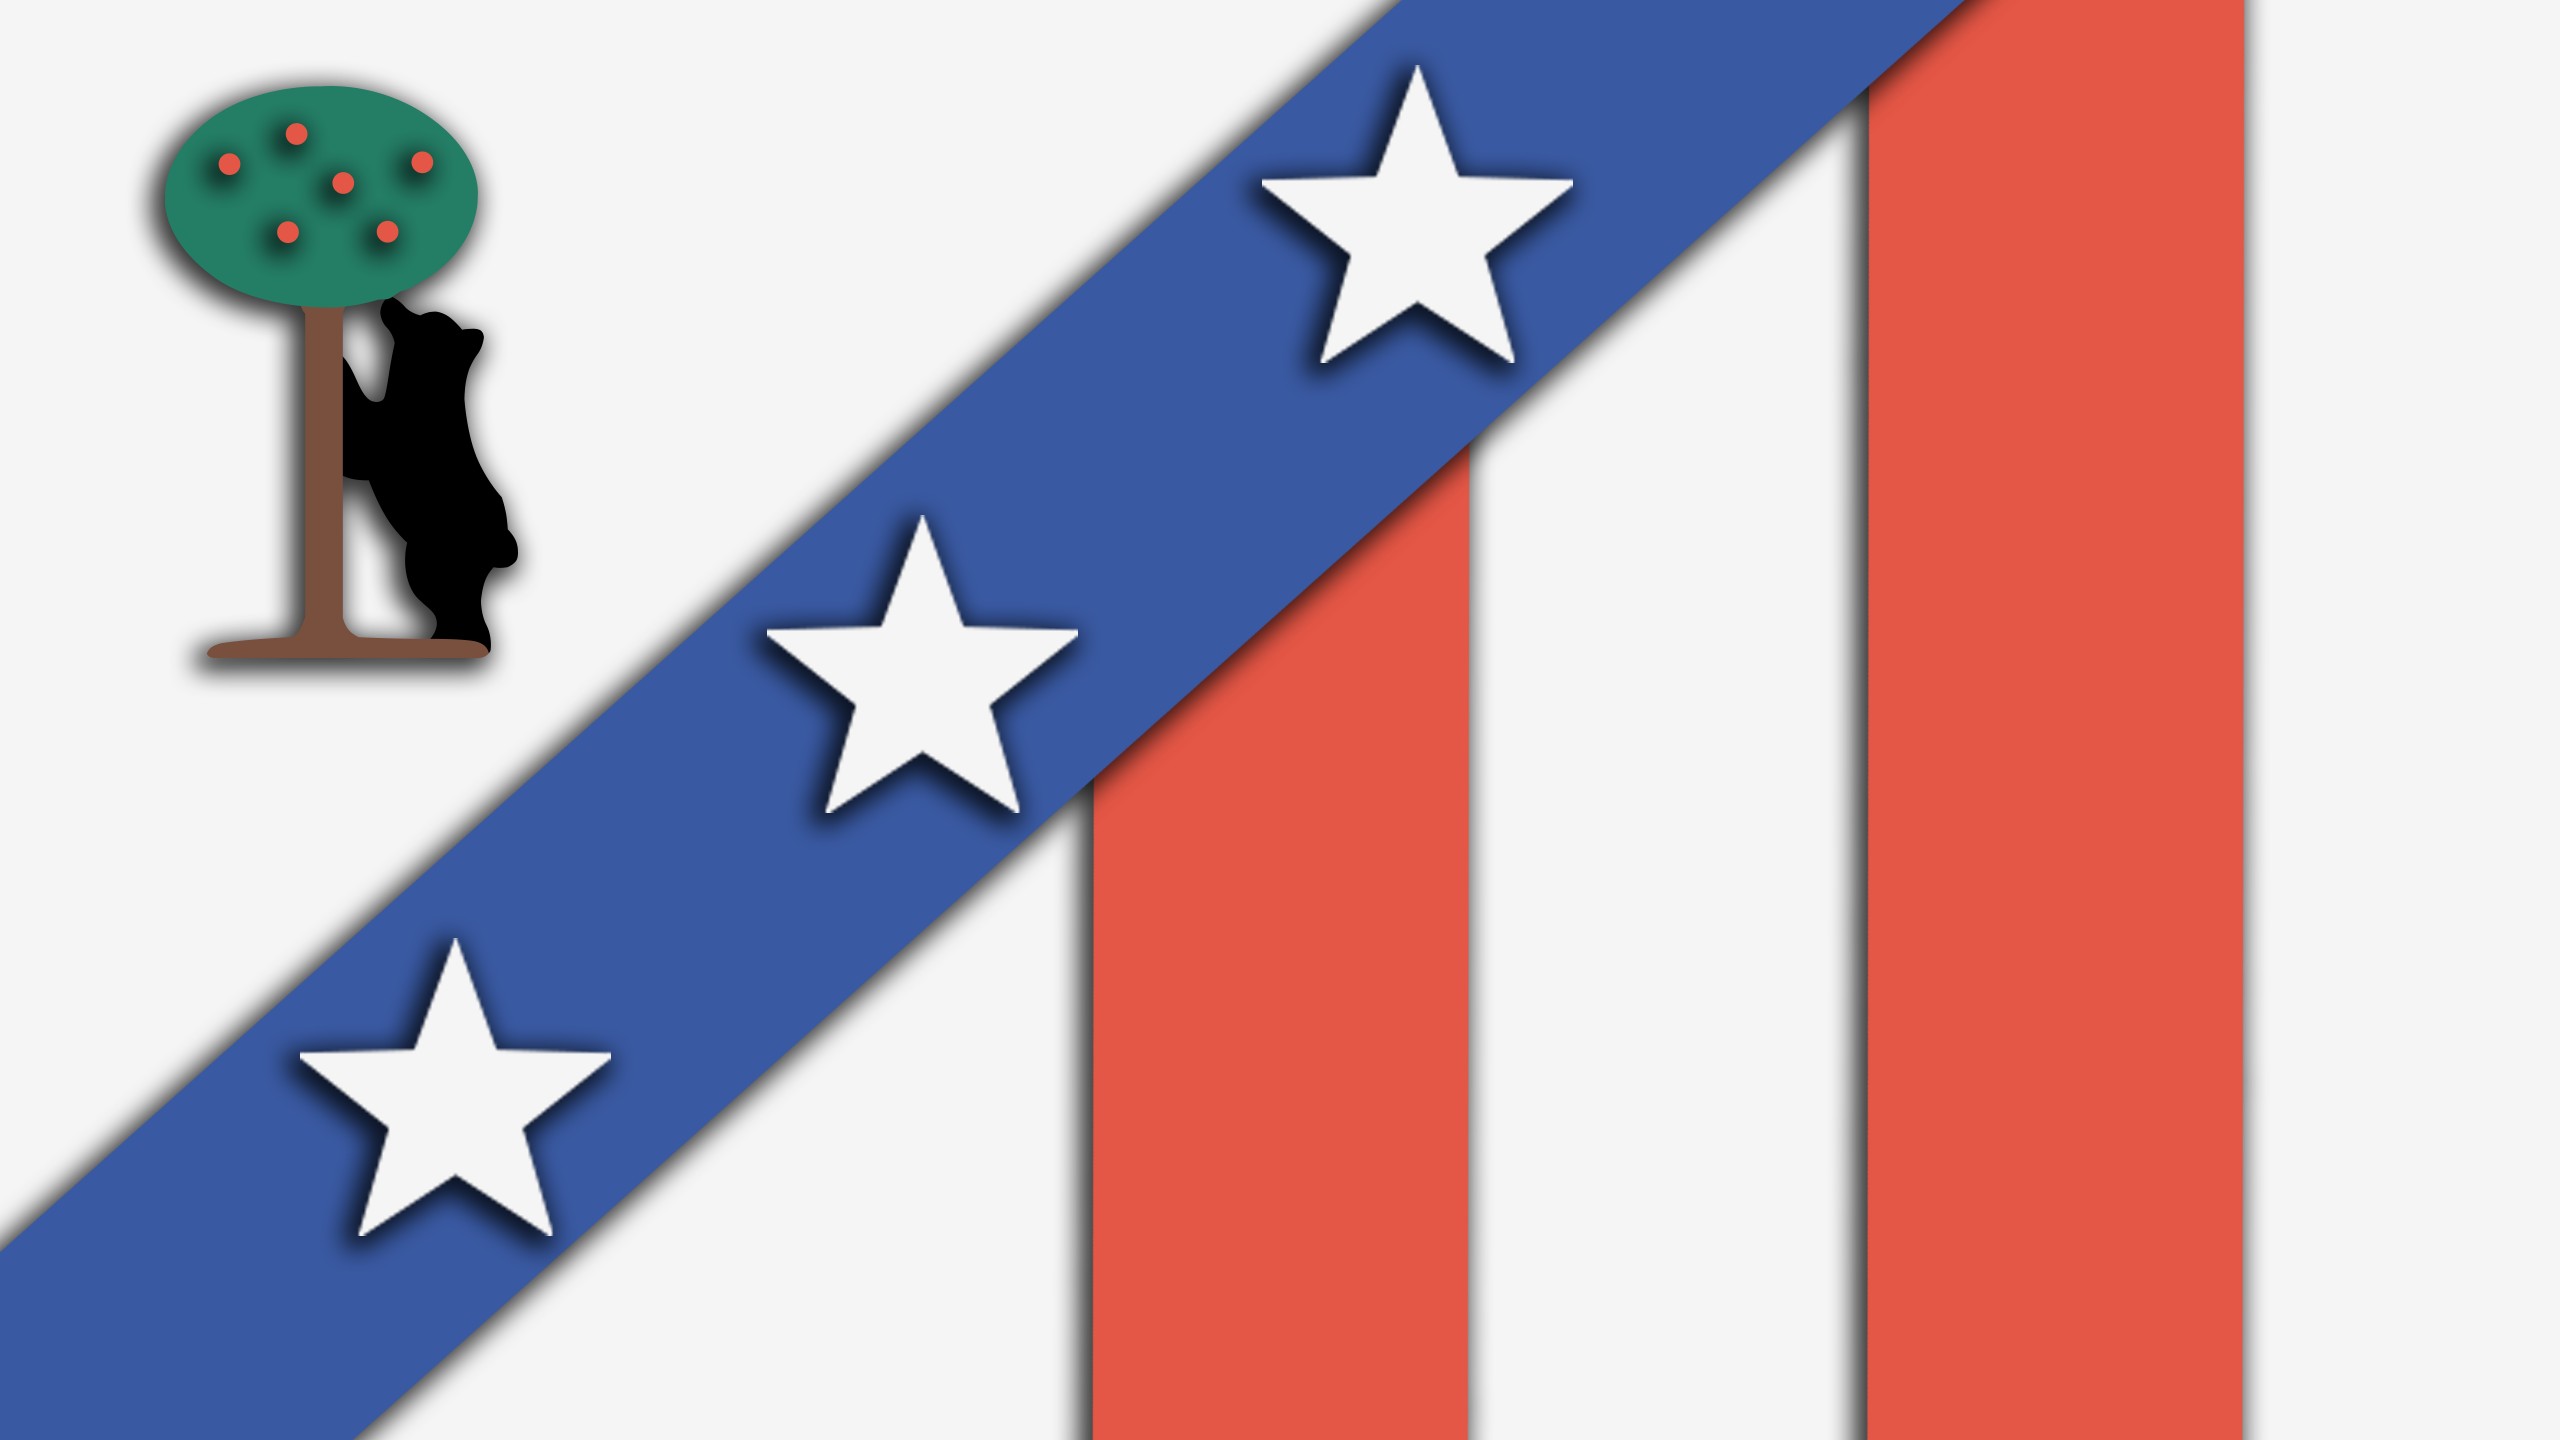 Atletico Madrid, Soccer, Soccer clubs, Sport, Sports, Material style, Sports club Wallpaper